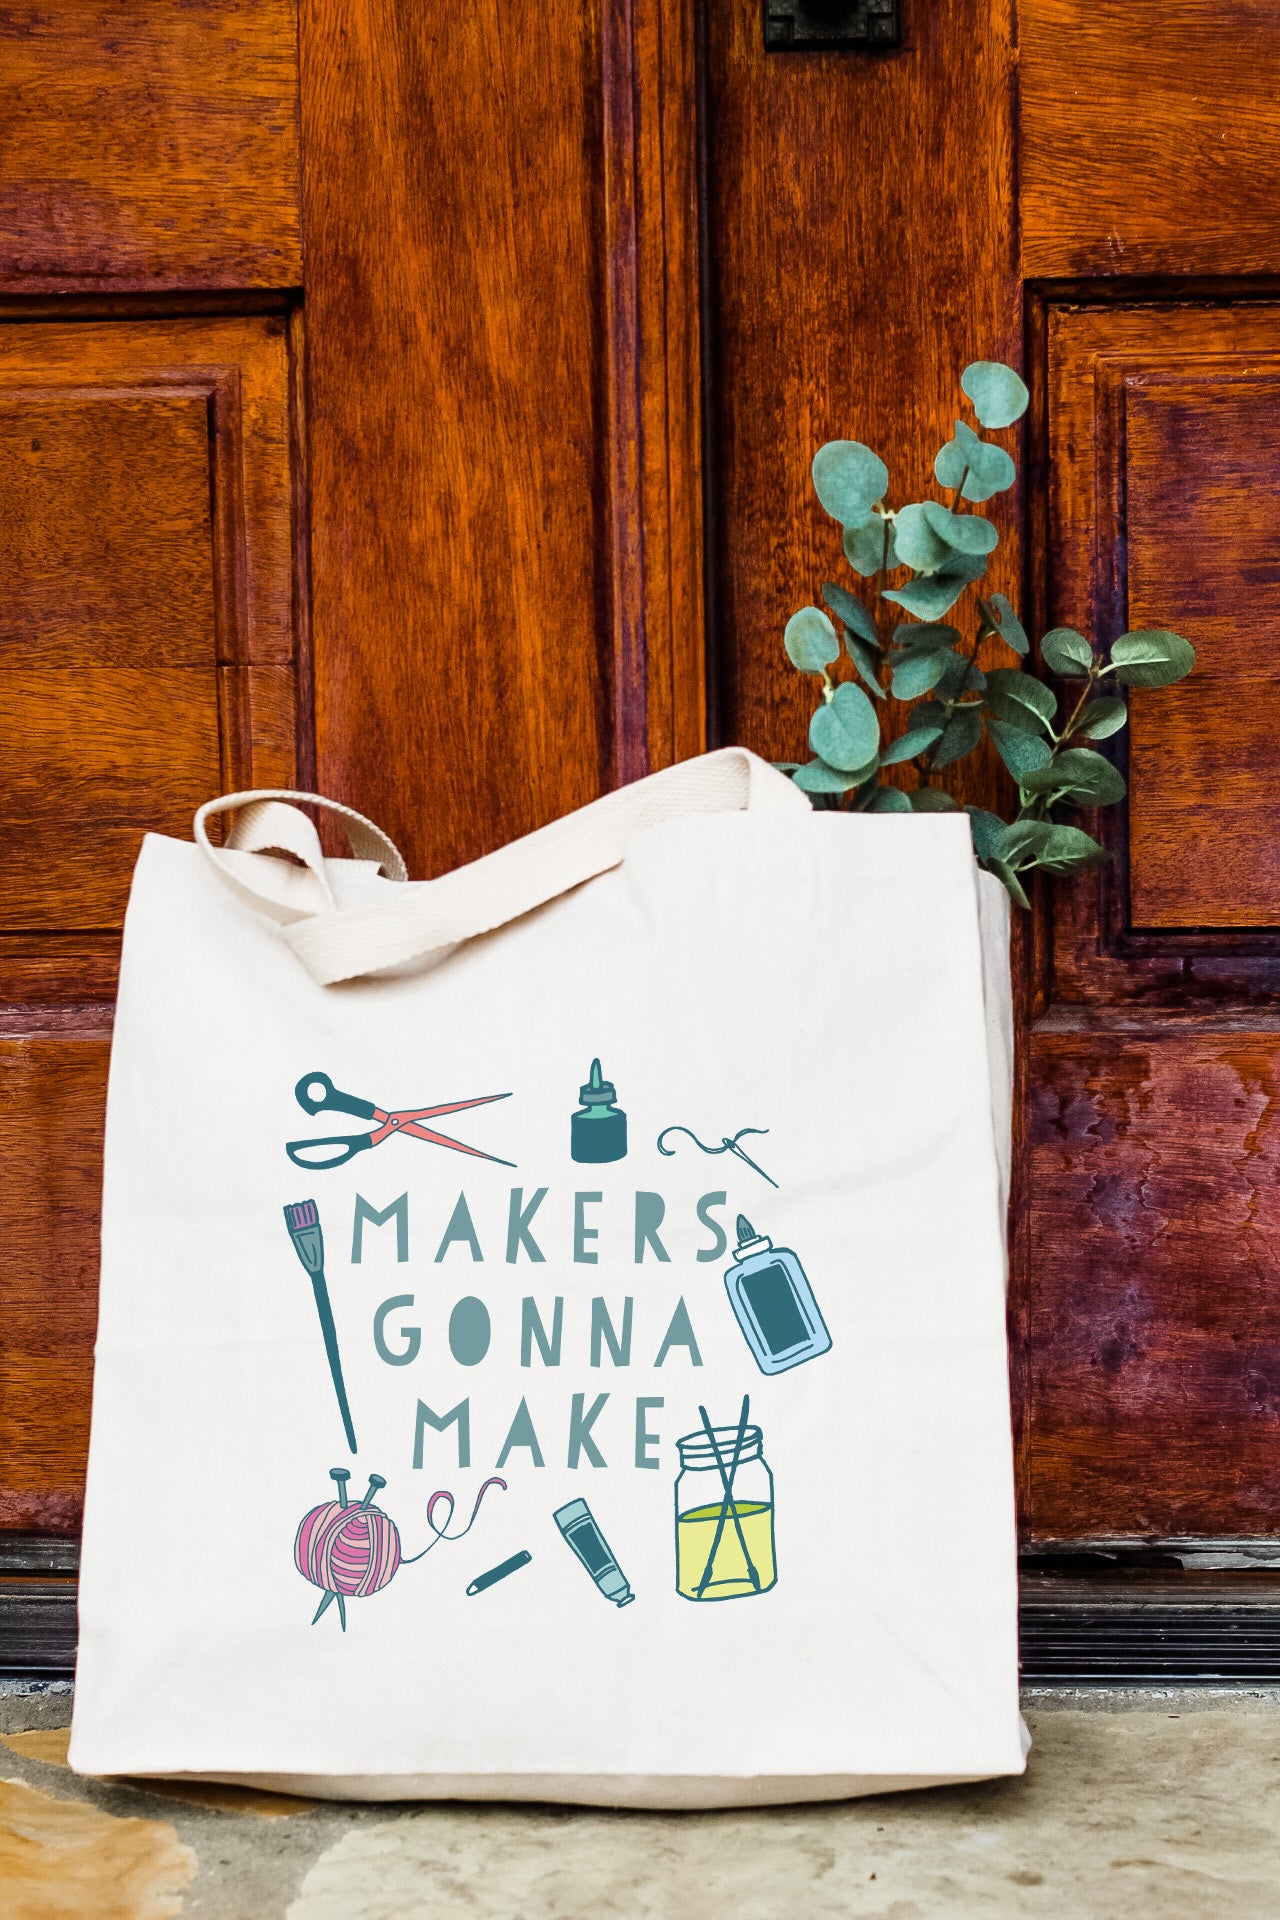 a tote bag sitting in front of a wooden door